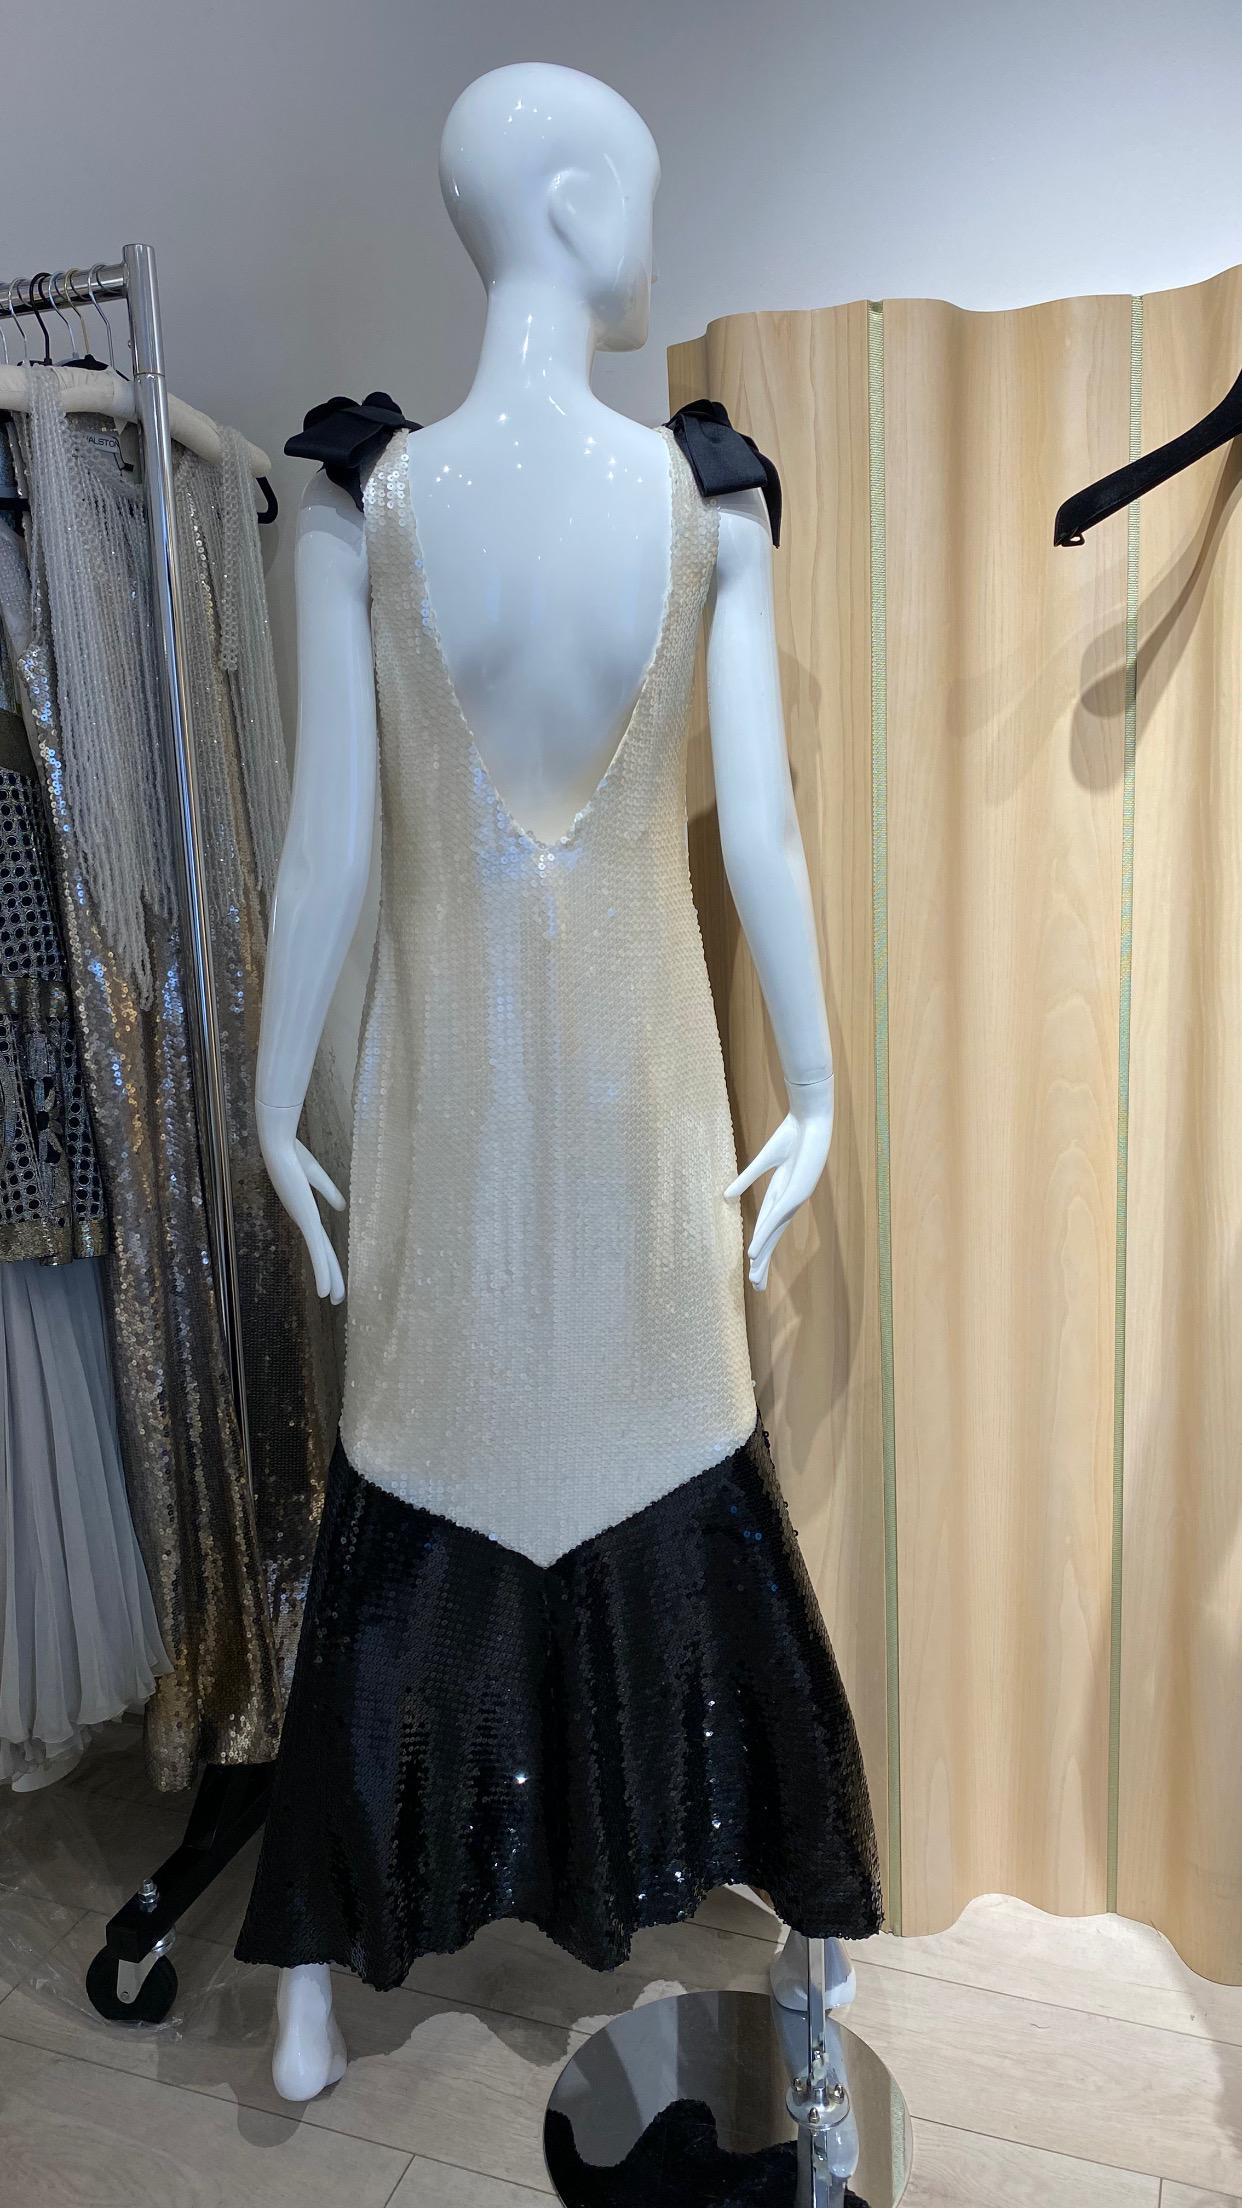 Beautiful Vintage Chanel Silver and Black sequin dress with bows. Dress lined in silk.
- Wedding dress
- Bridal - Black Tie event
Measurement:
Bust: 36”